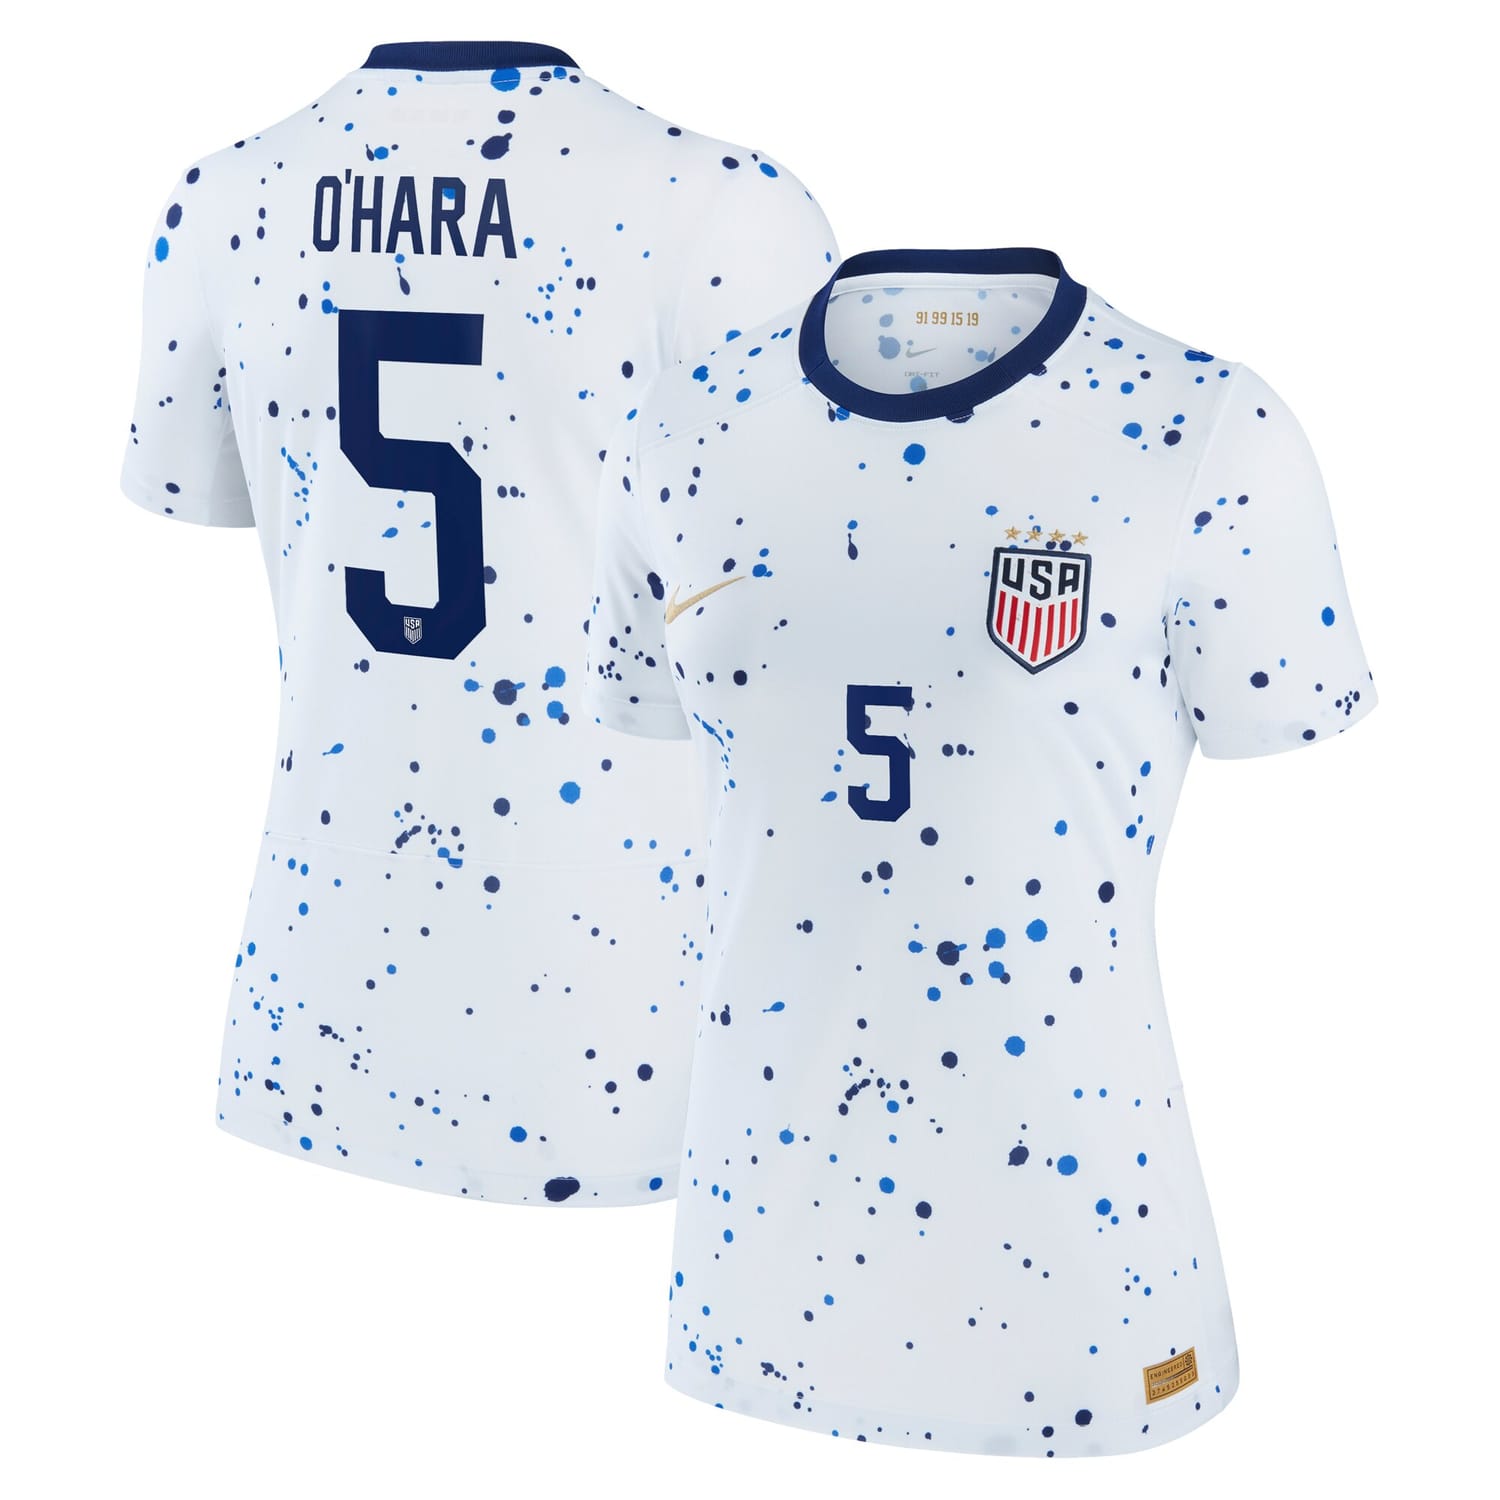 USWNT Home Jersey Shirt White 2023 player Kelley O'Hara printing for Women